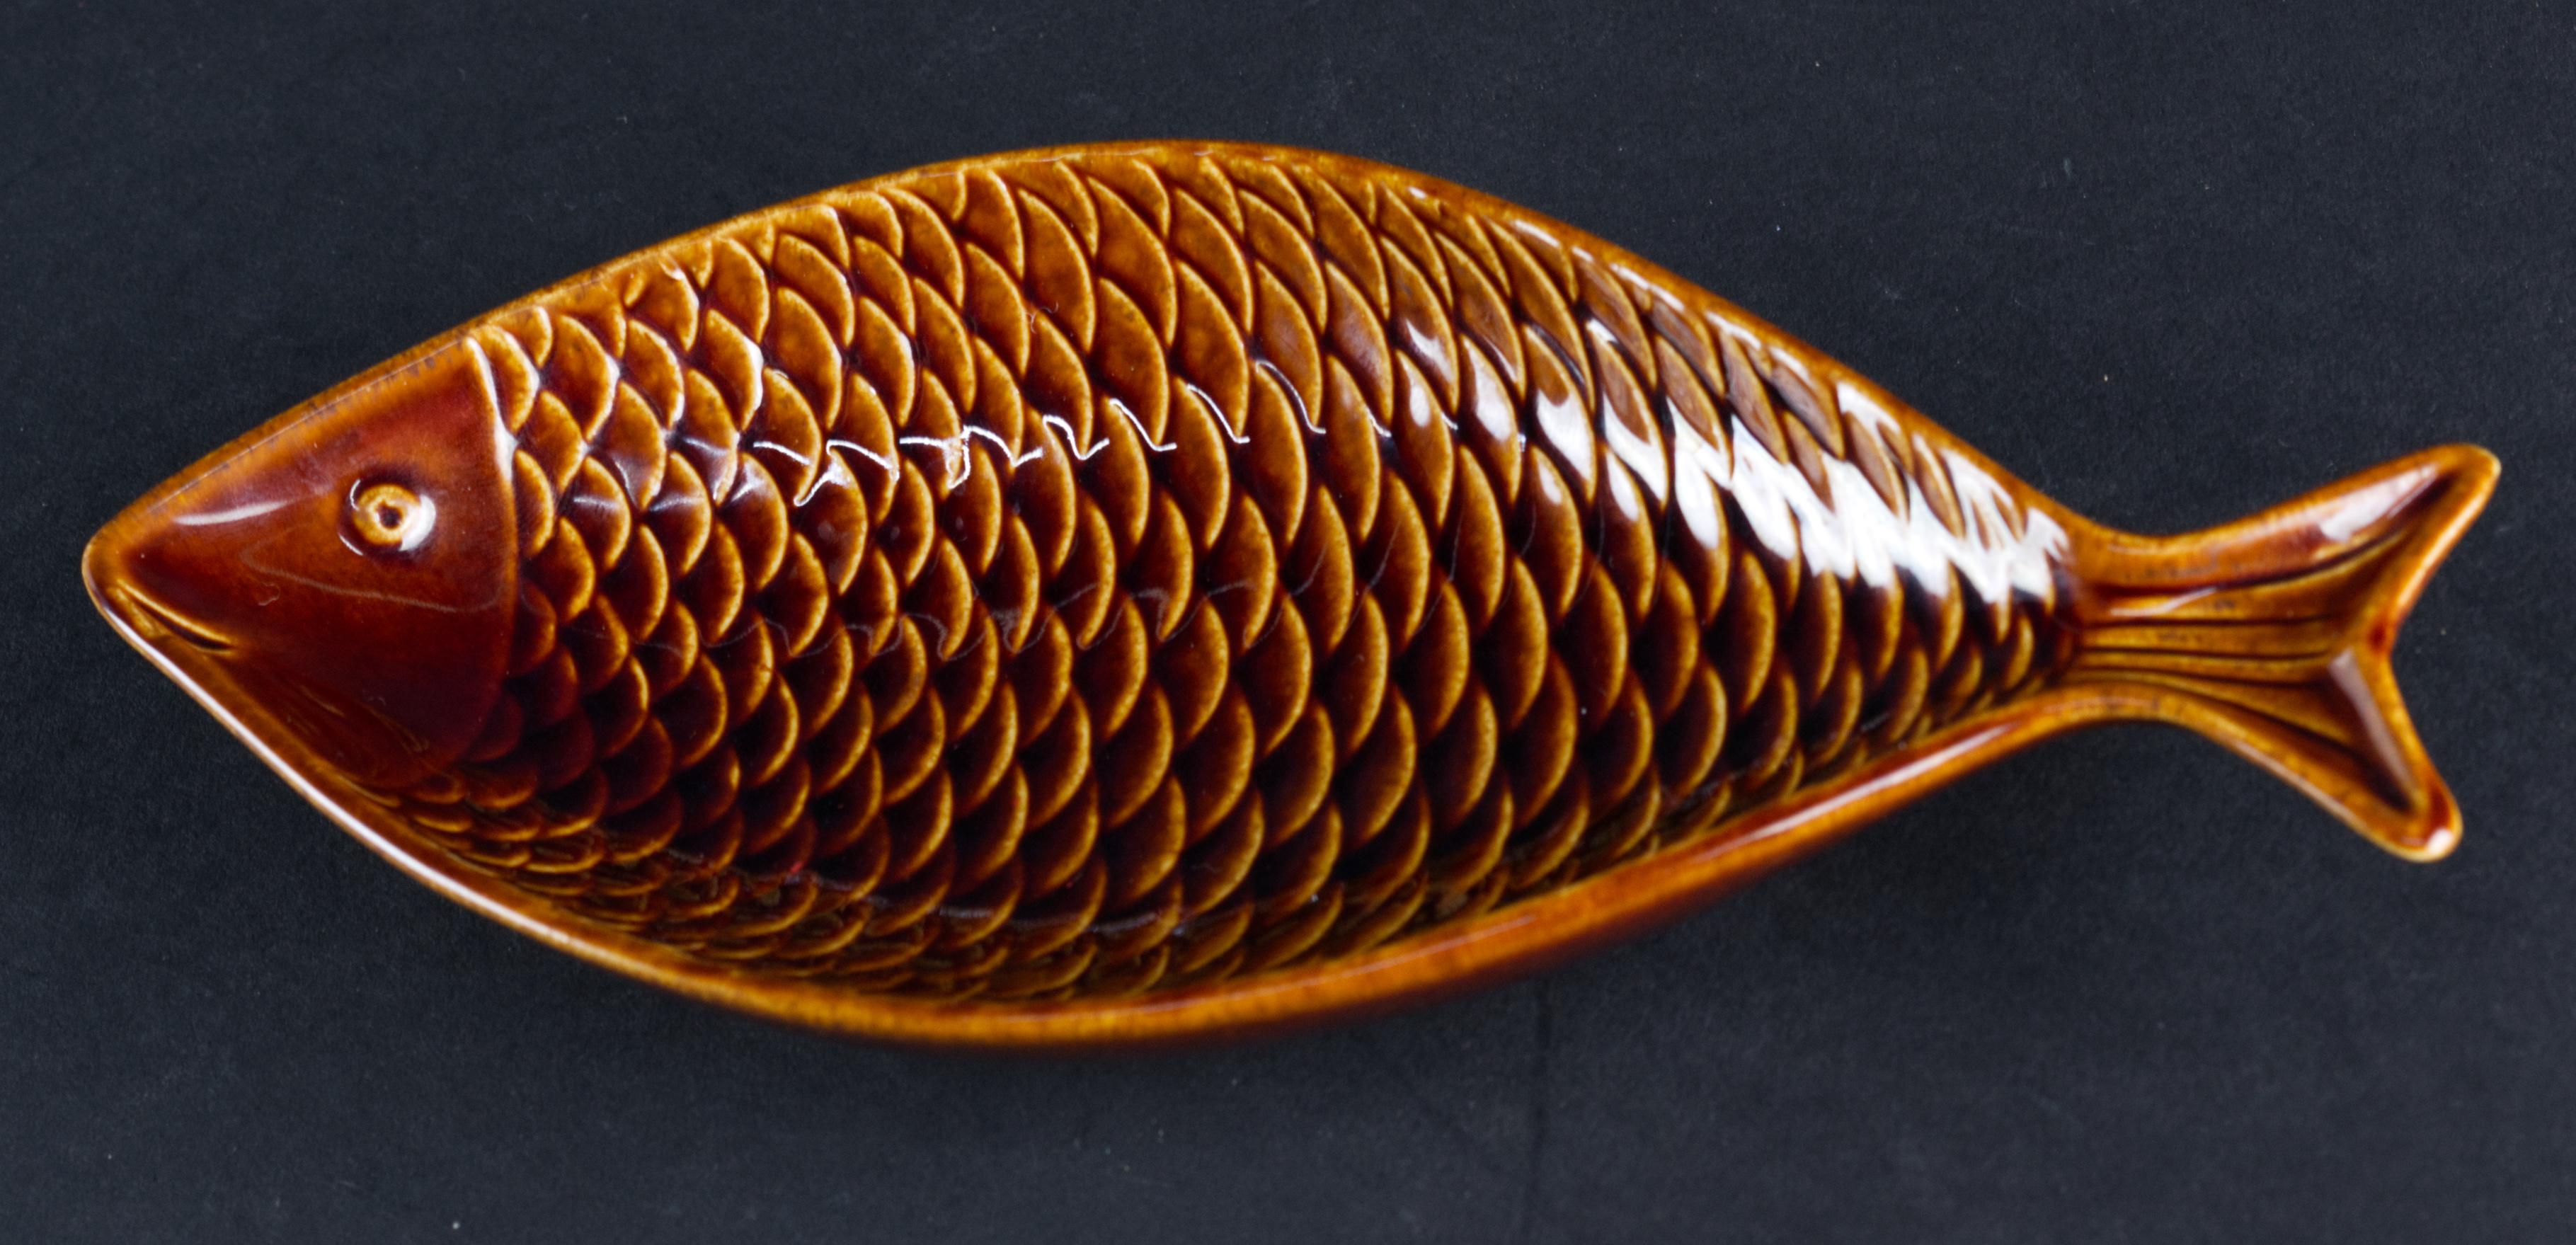  Fladen series was designed by Stig Lindberg for Gustavsberg Sweden in 1958.  The dish is formed in shape of a fish with beautifully detailed scales done in relief. Glossy warm brown glaze continues on outer surfaces of the dish; the bottom is